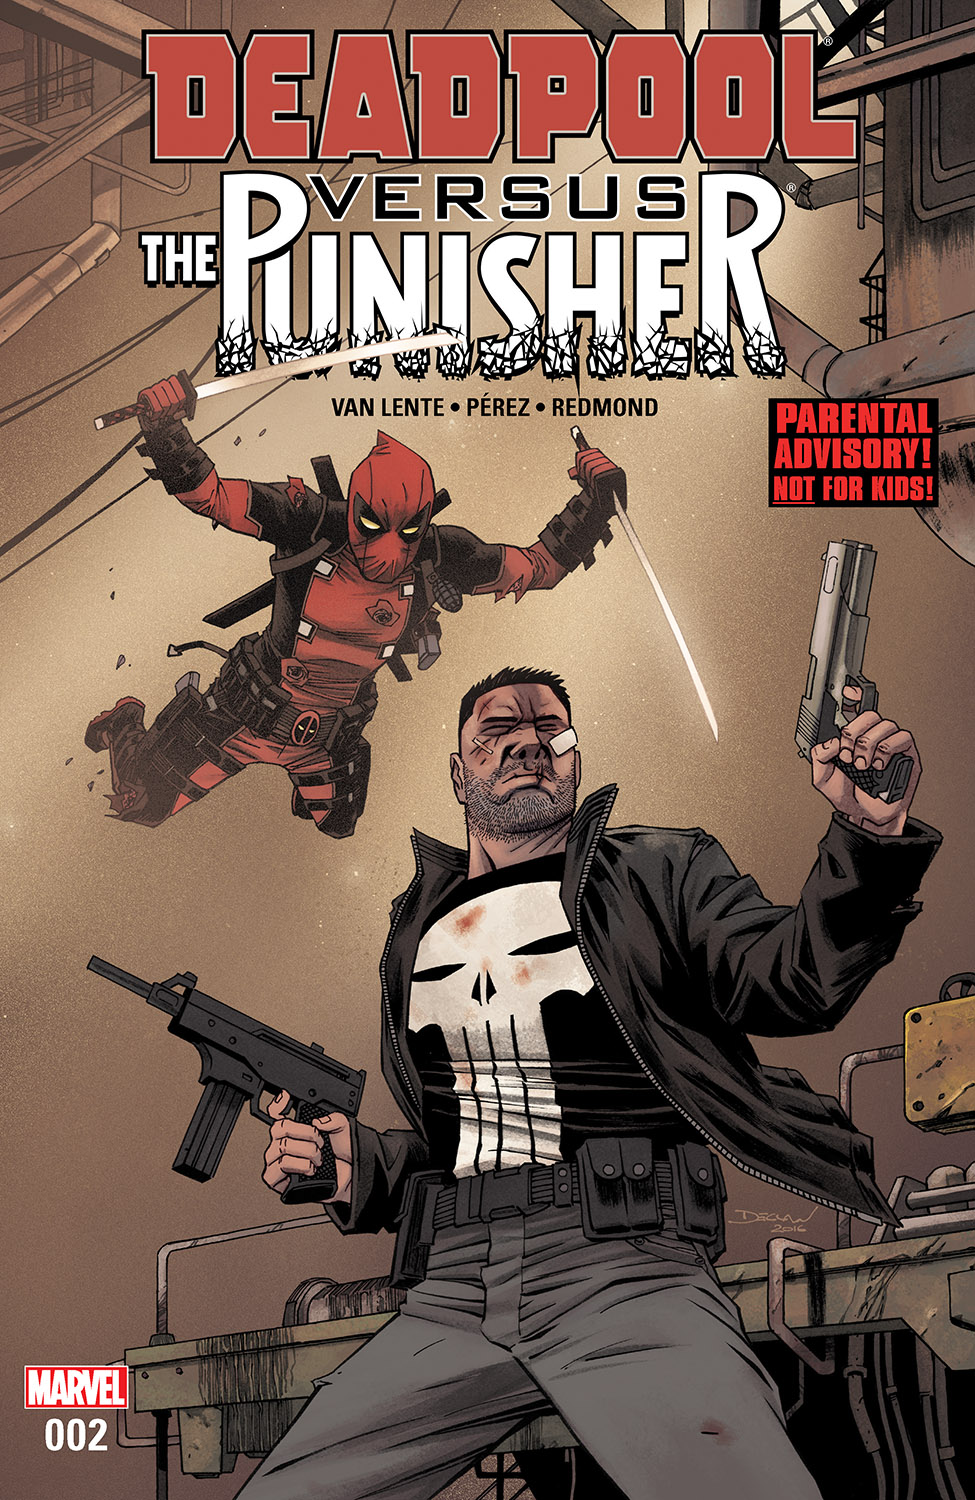 Deadpool and the punisher